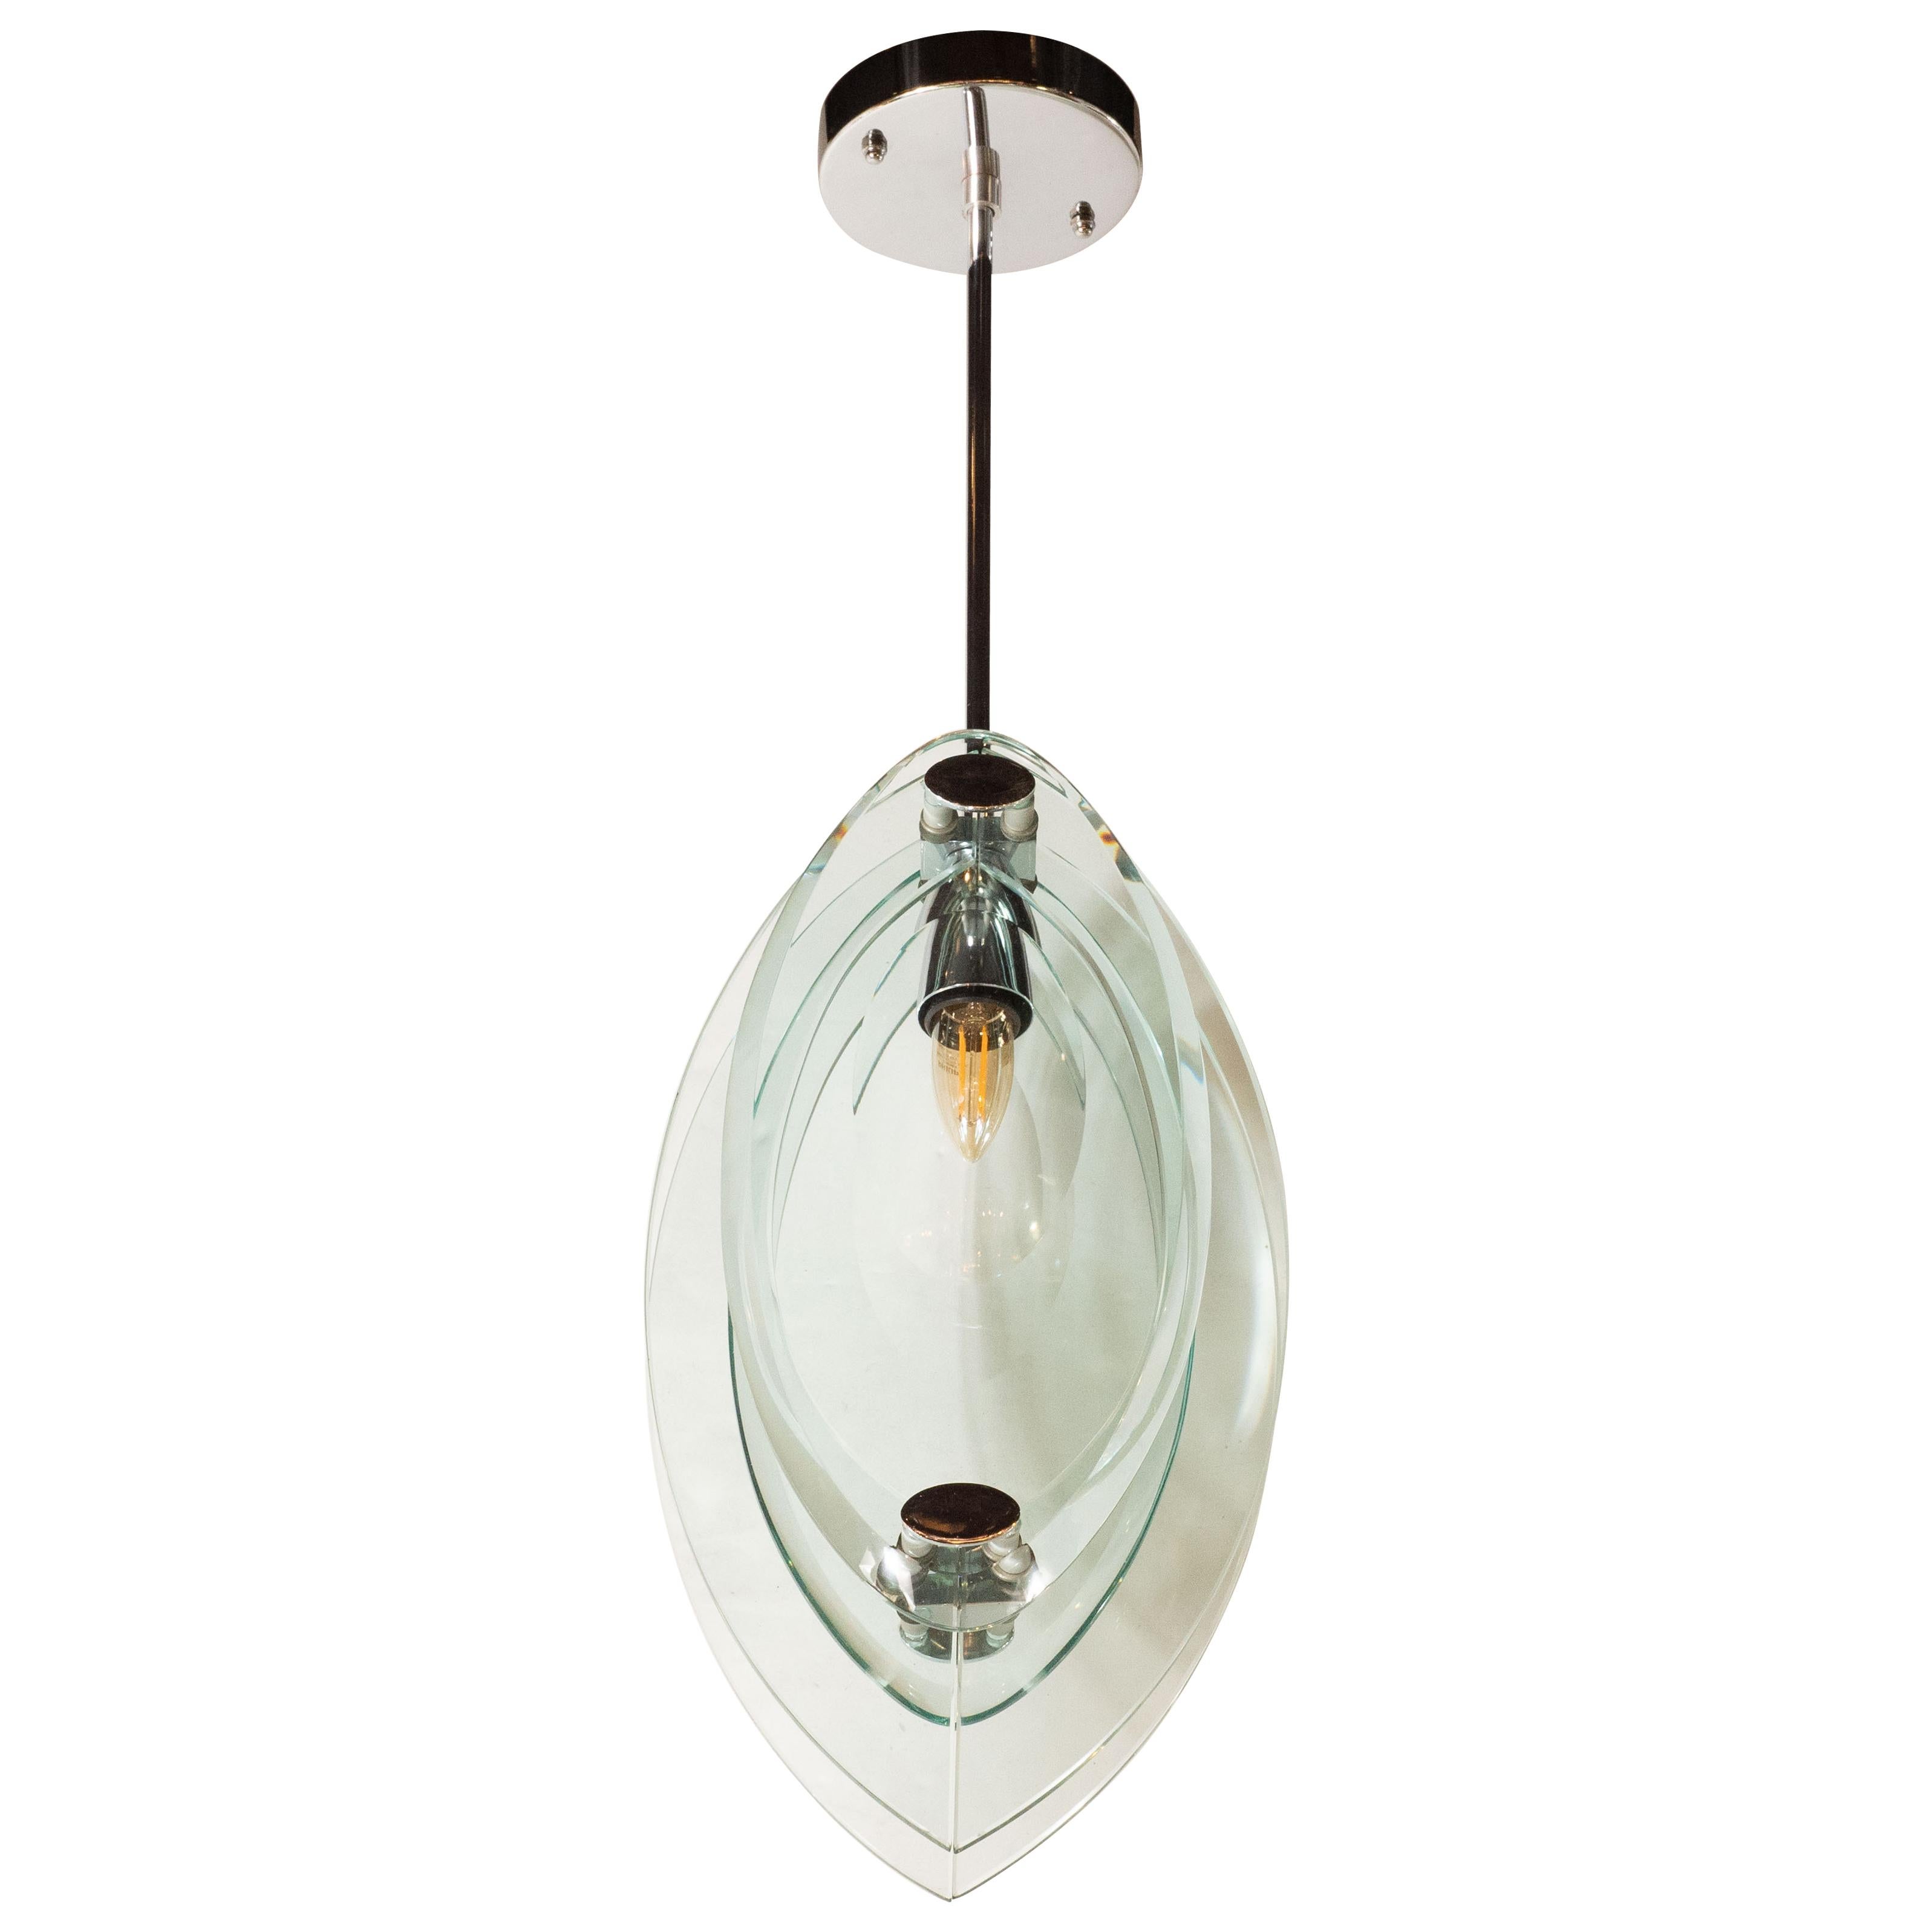 Mid-Century Modern Pendant with Chrome Fittings in the Manner of Fontana Arte